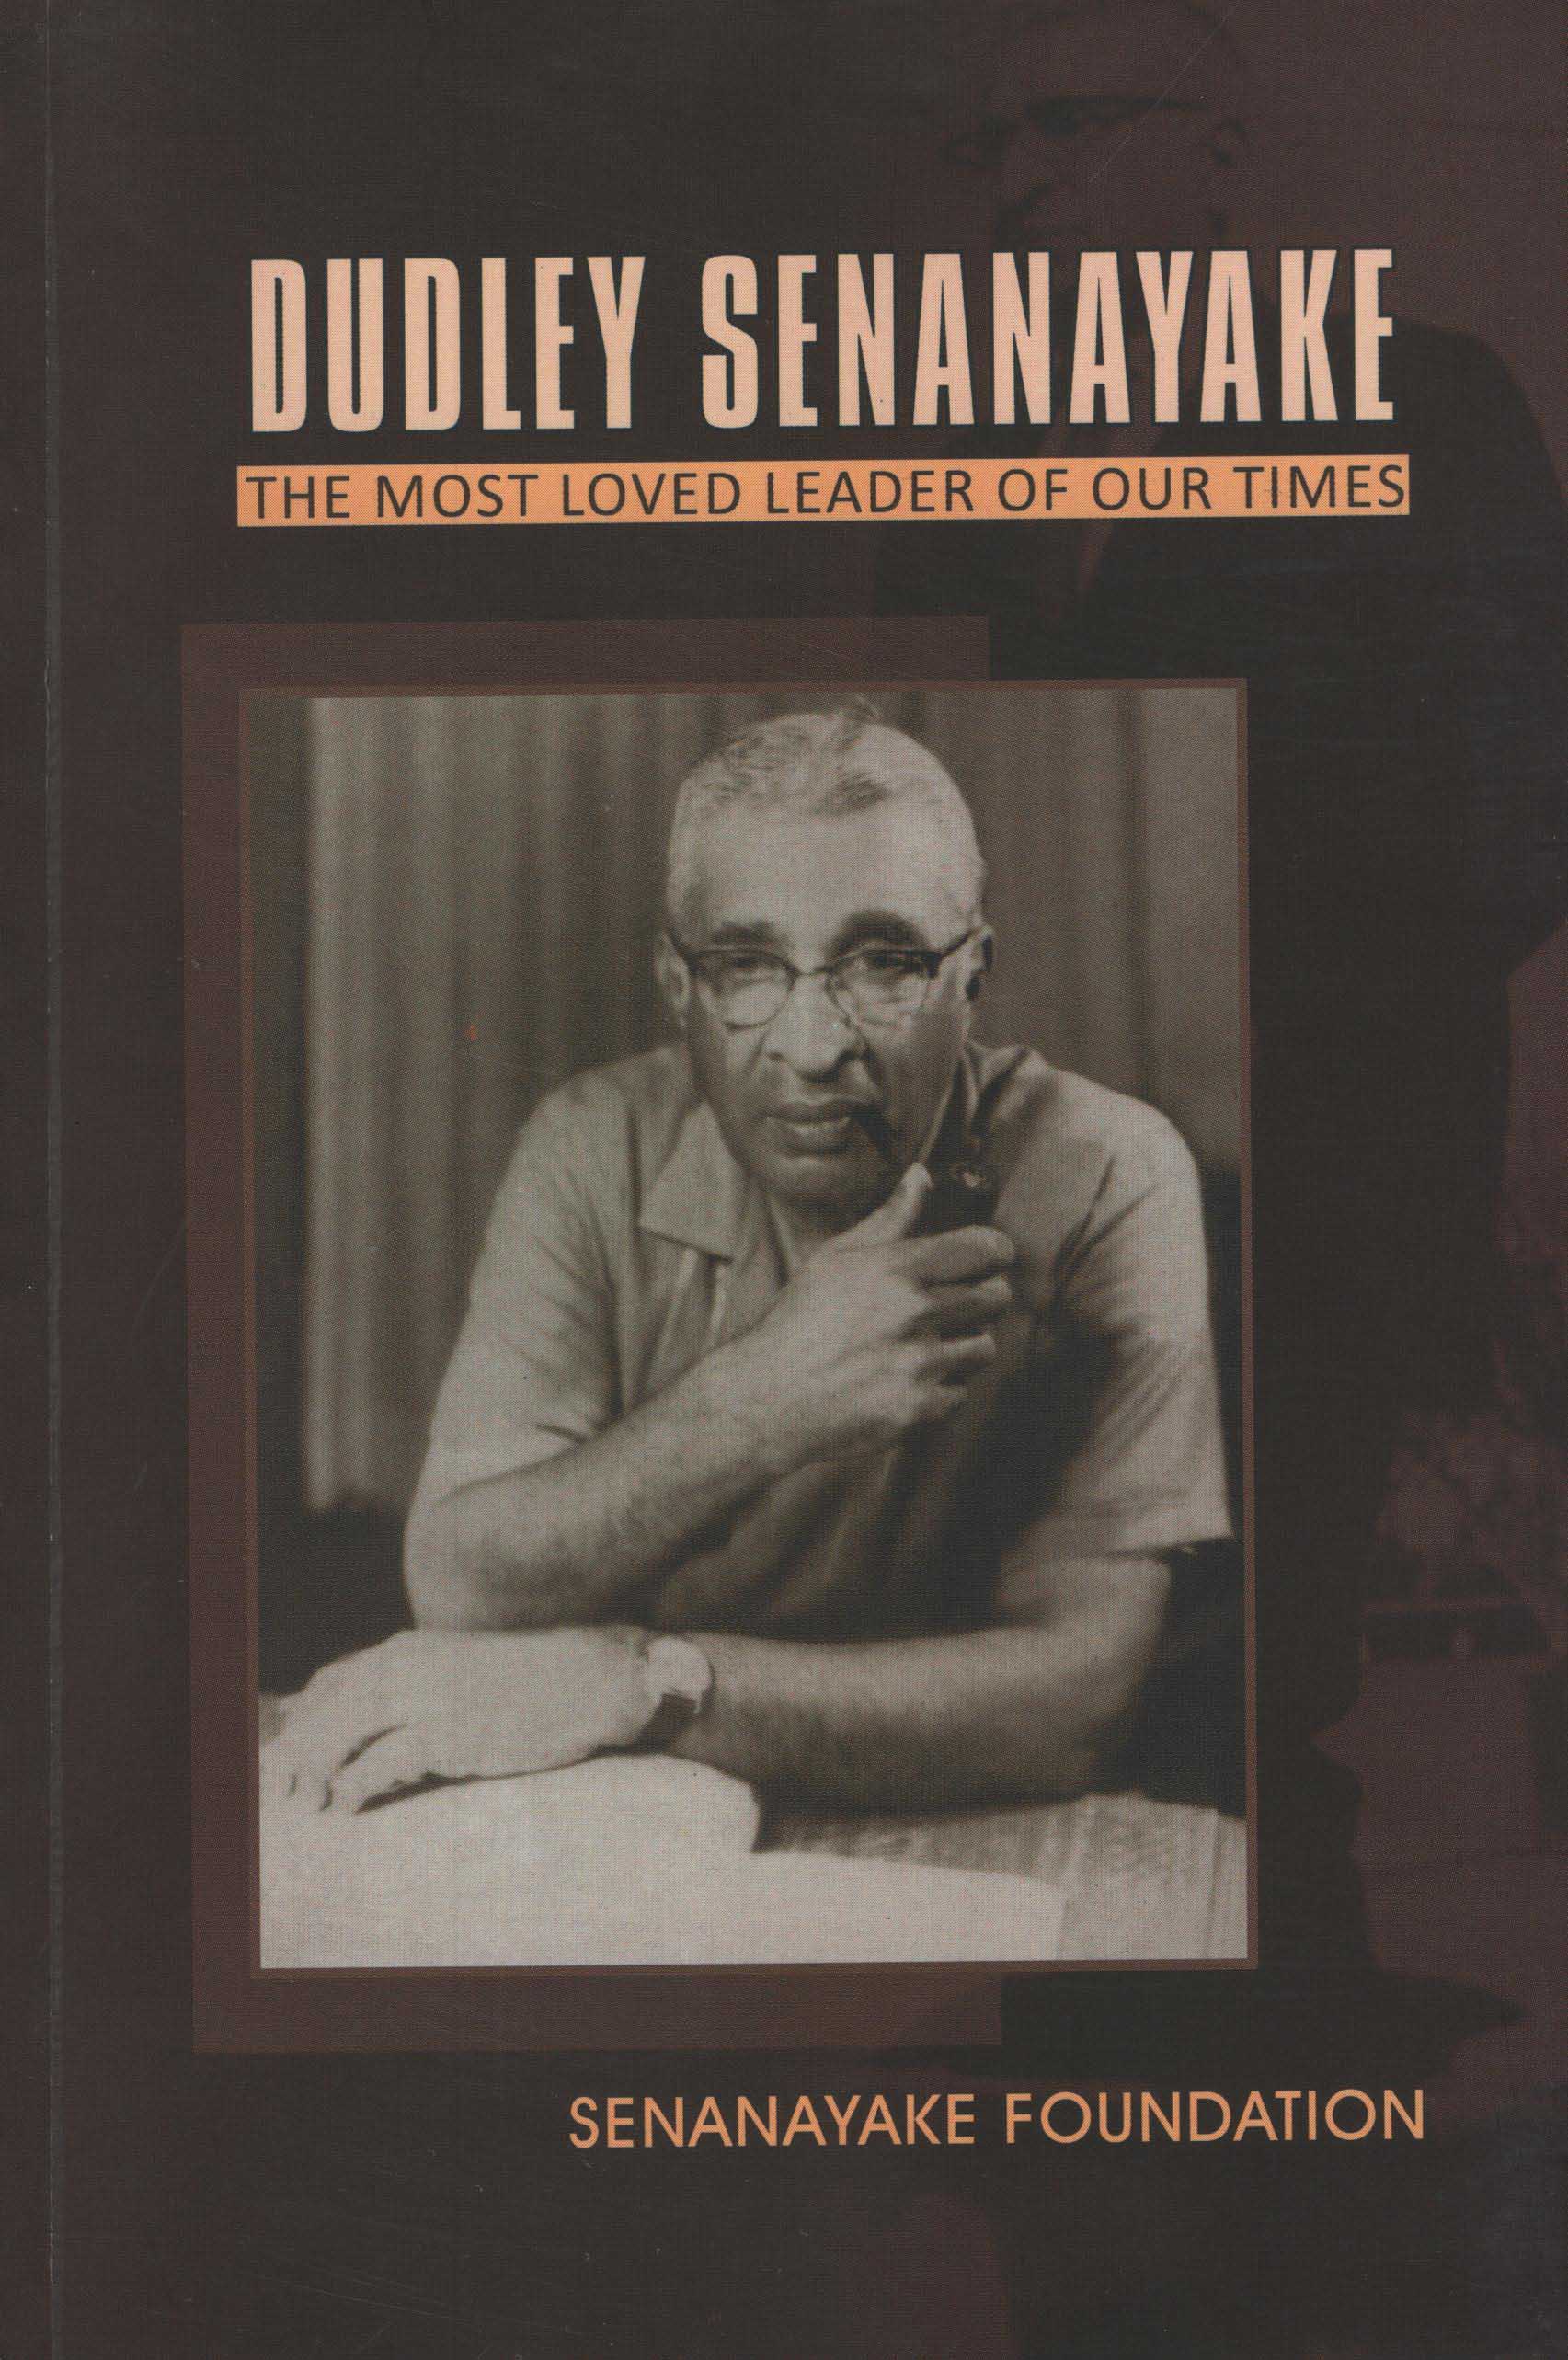 Dudley Senanayake The Most Loved Leader of Our Times (A Biography)